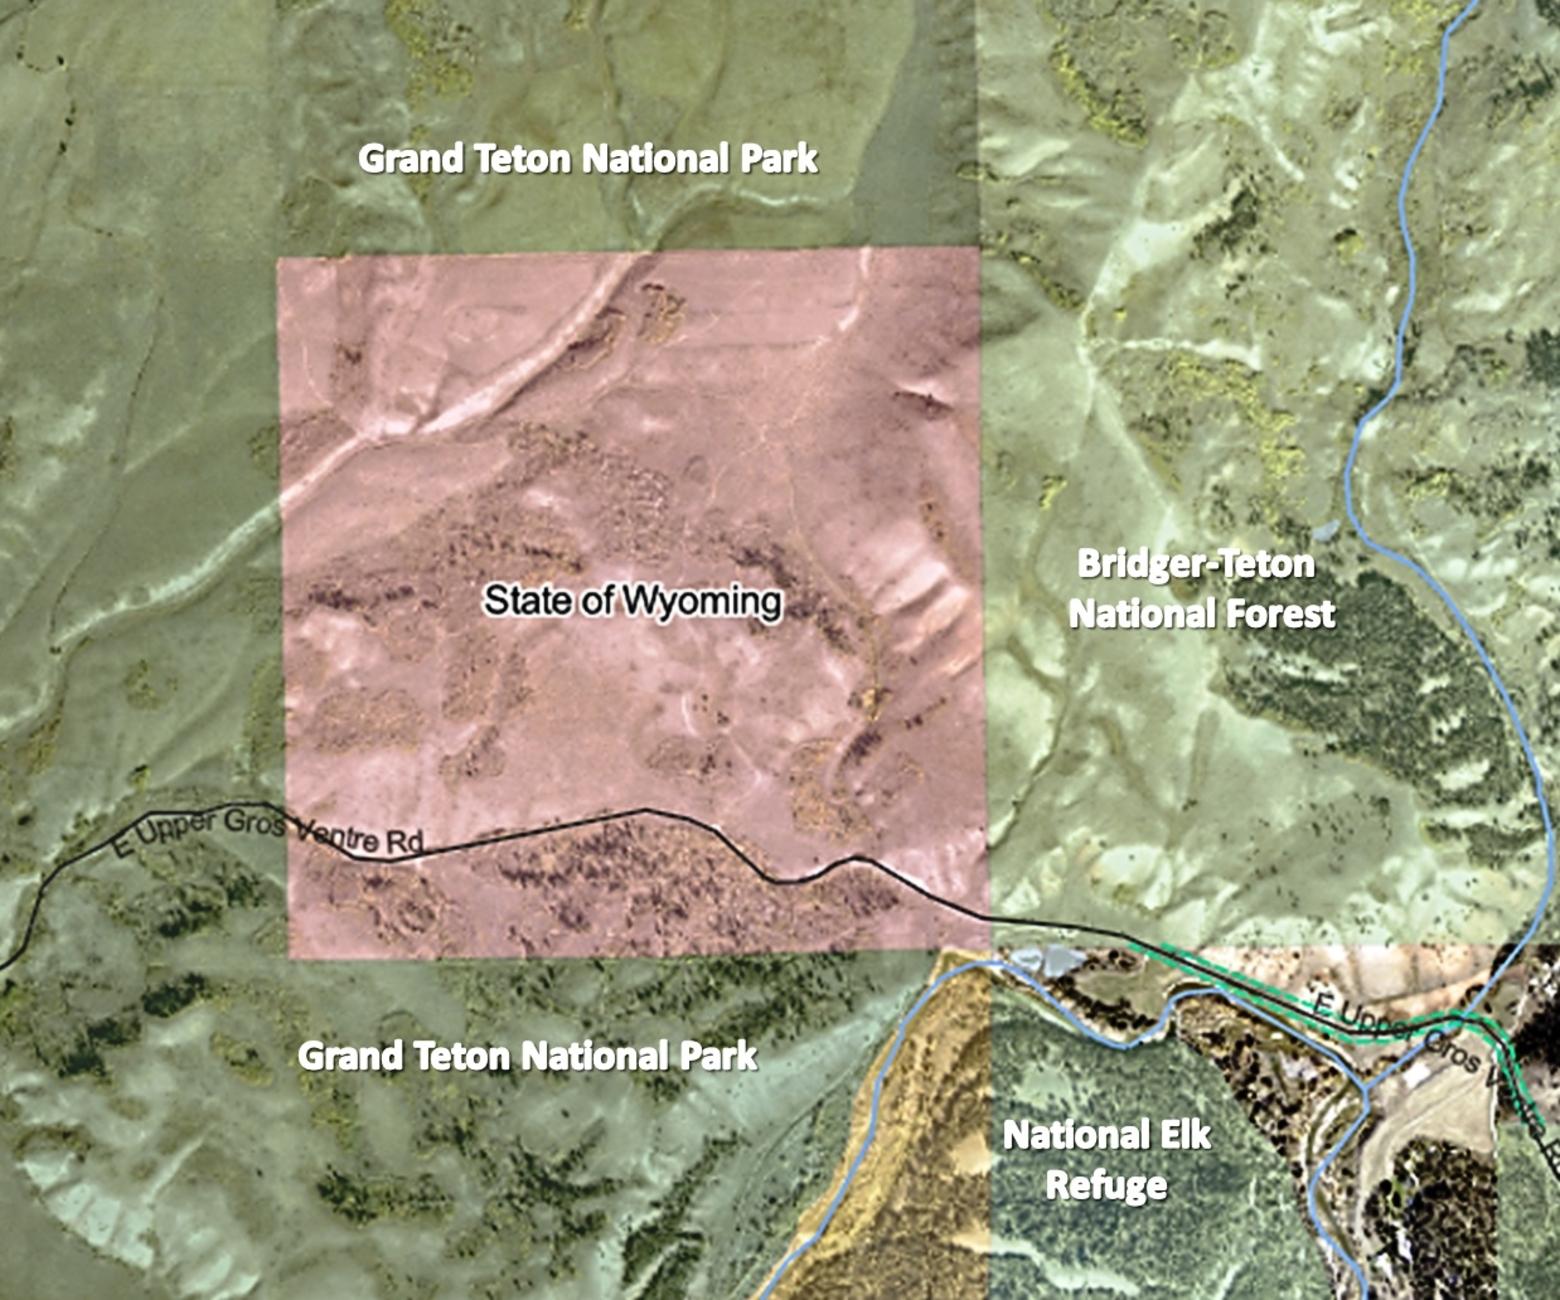 School sections such as the Kelly parcel (in pink) within Grand Teton National Park were deeded when Wyoming became a state in 1890, before the park was later expanded to encompass them.